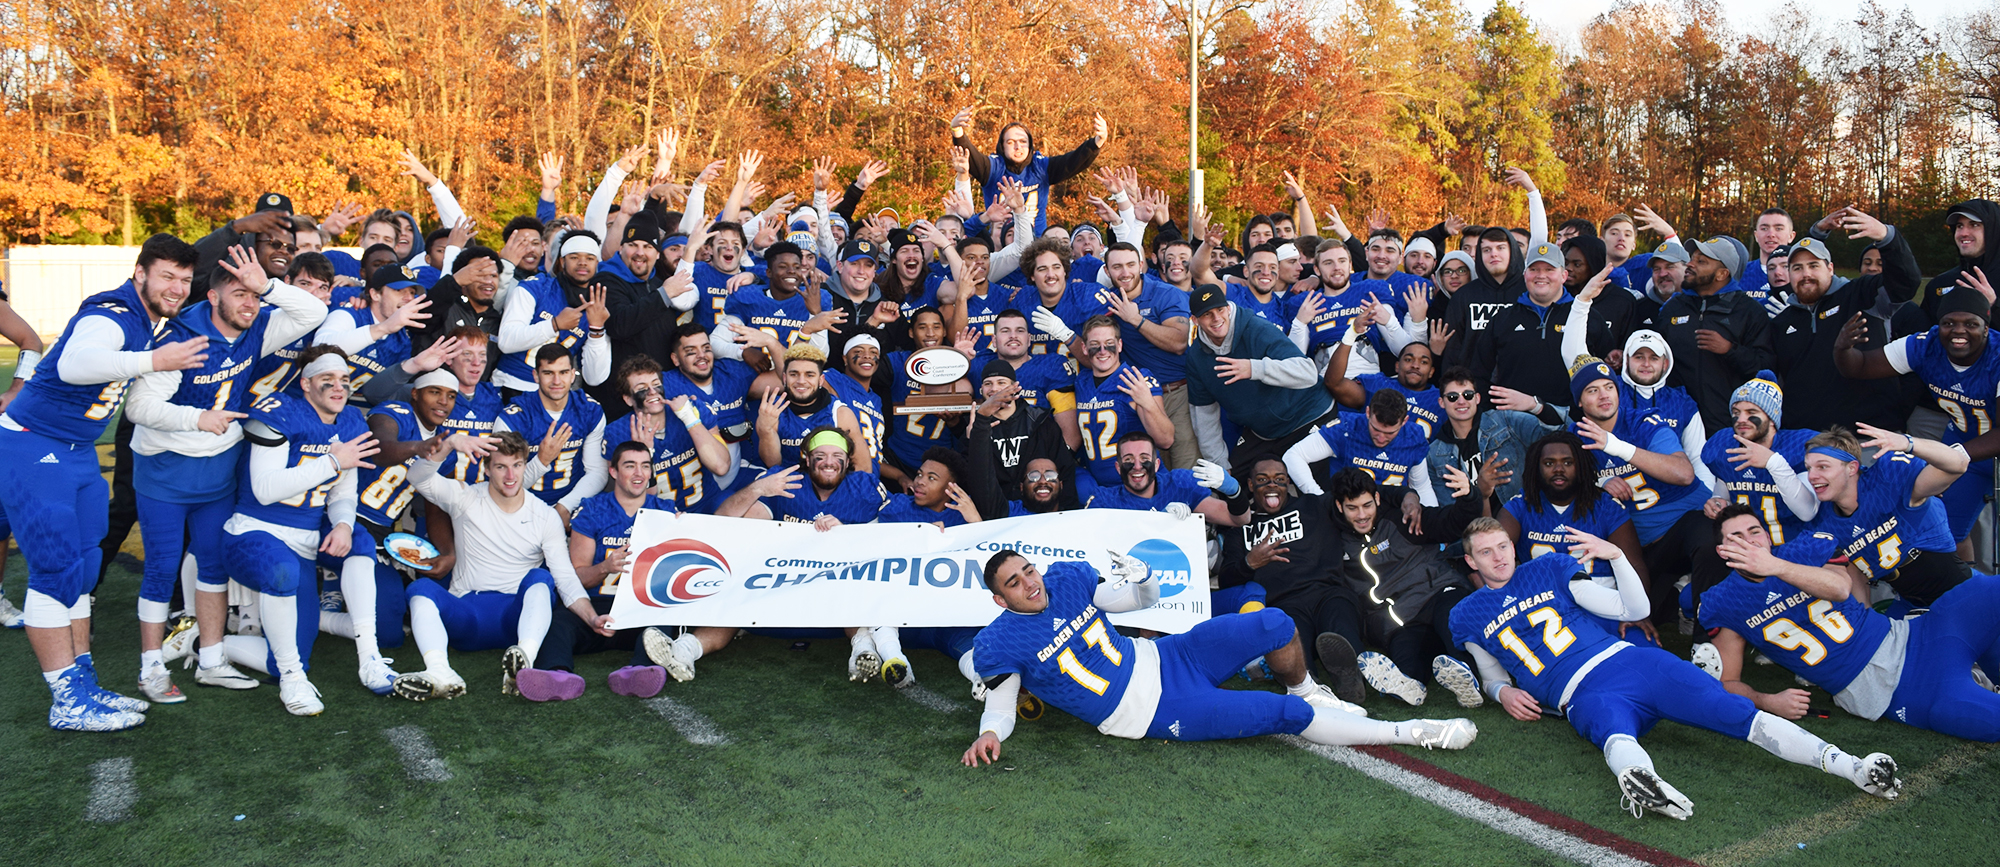 Western New England clinched its fourth straight conference title on Saturday.